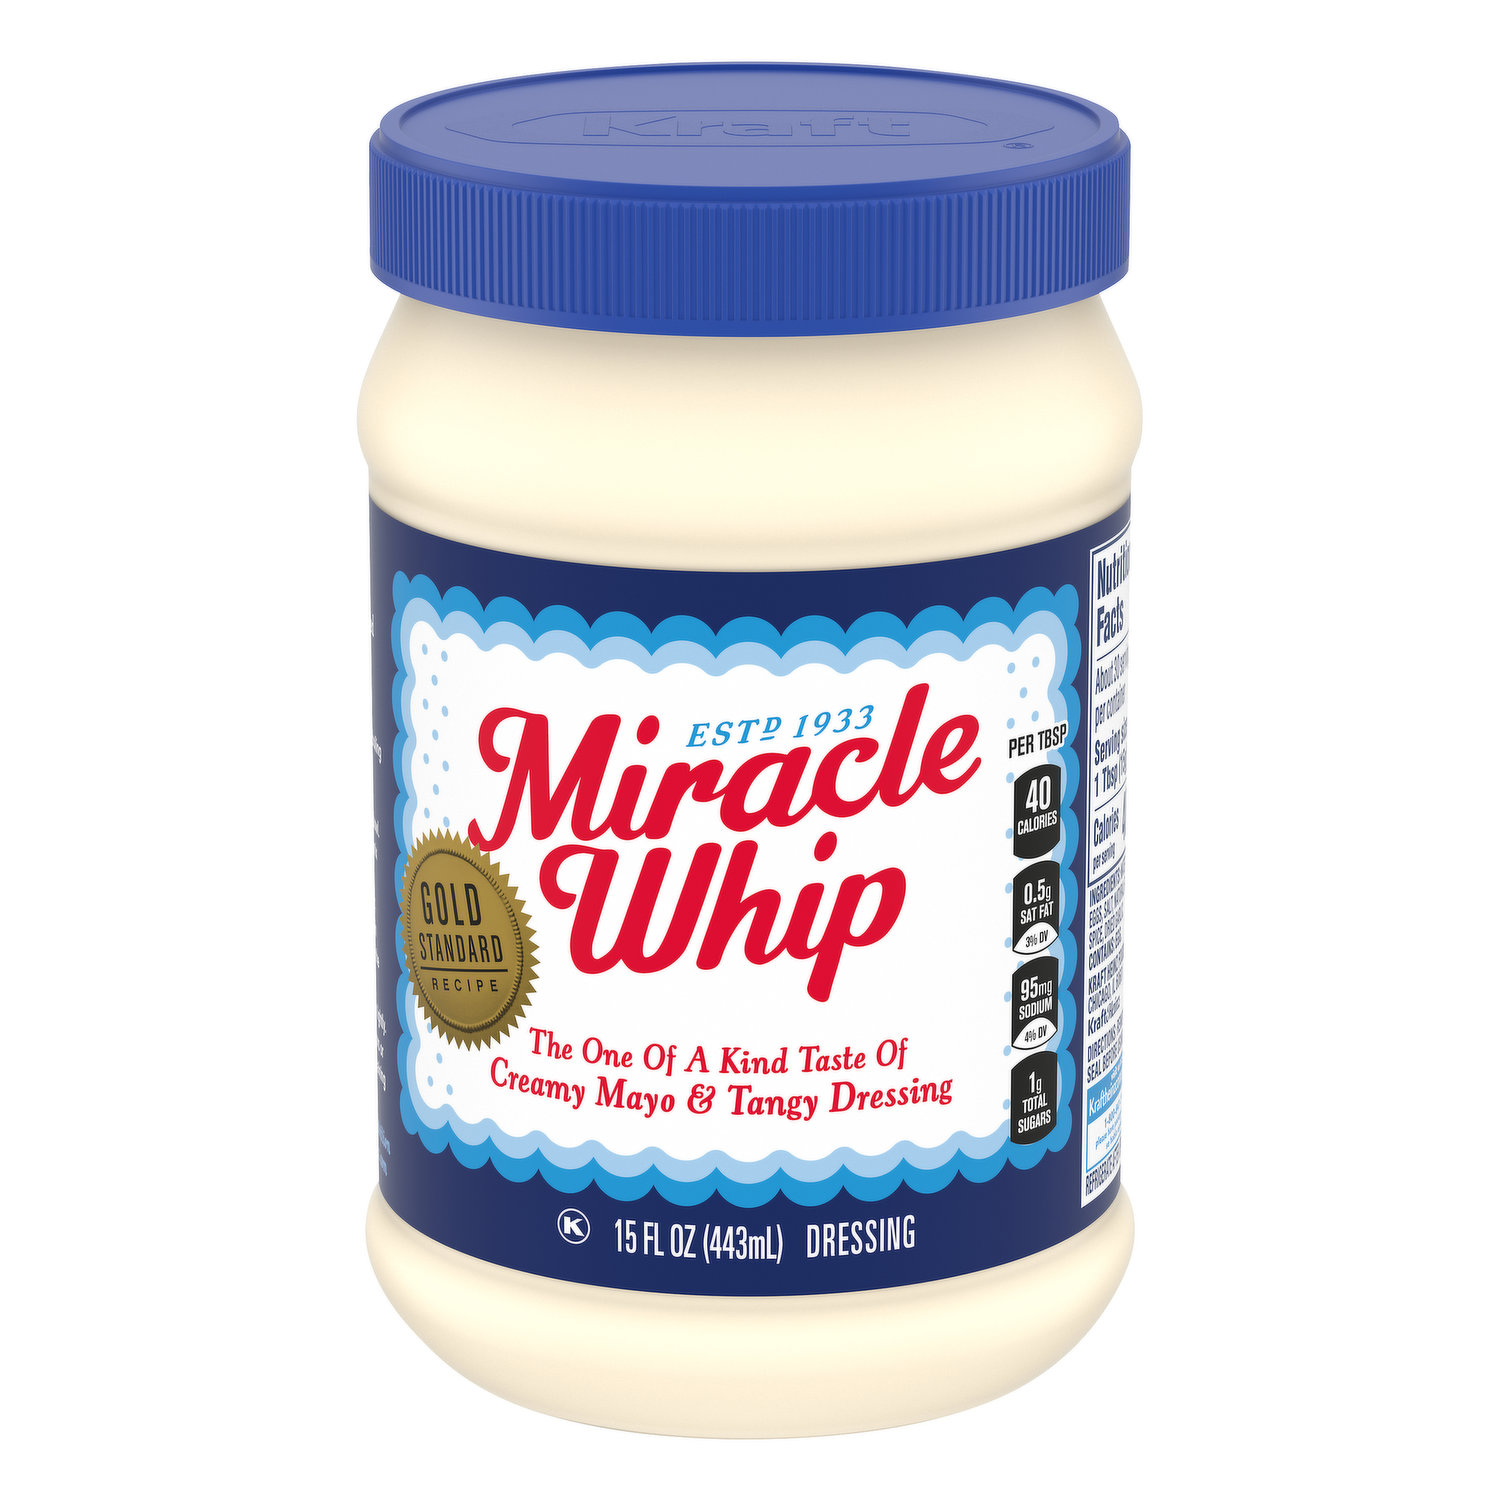 Let's Talk about Miracle Whip and GMOs